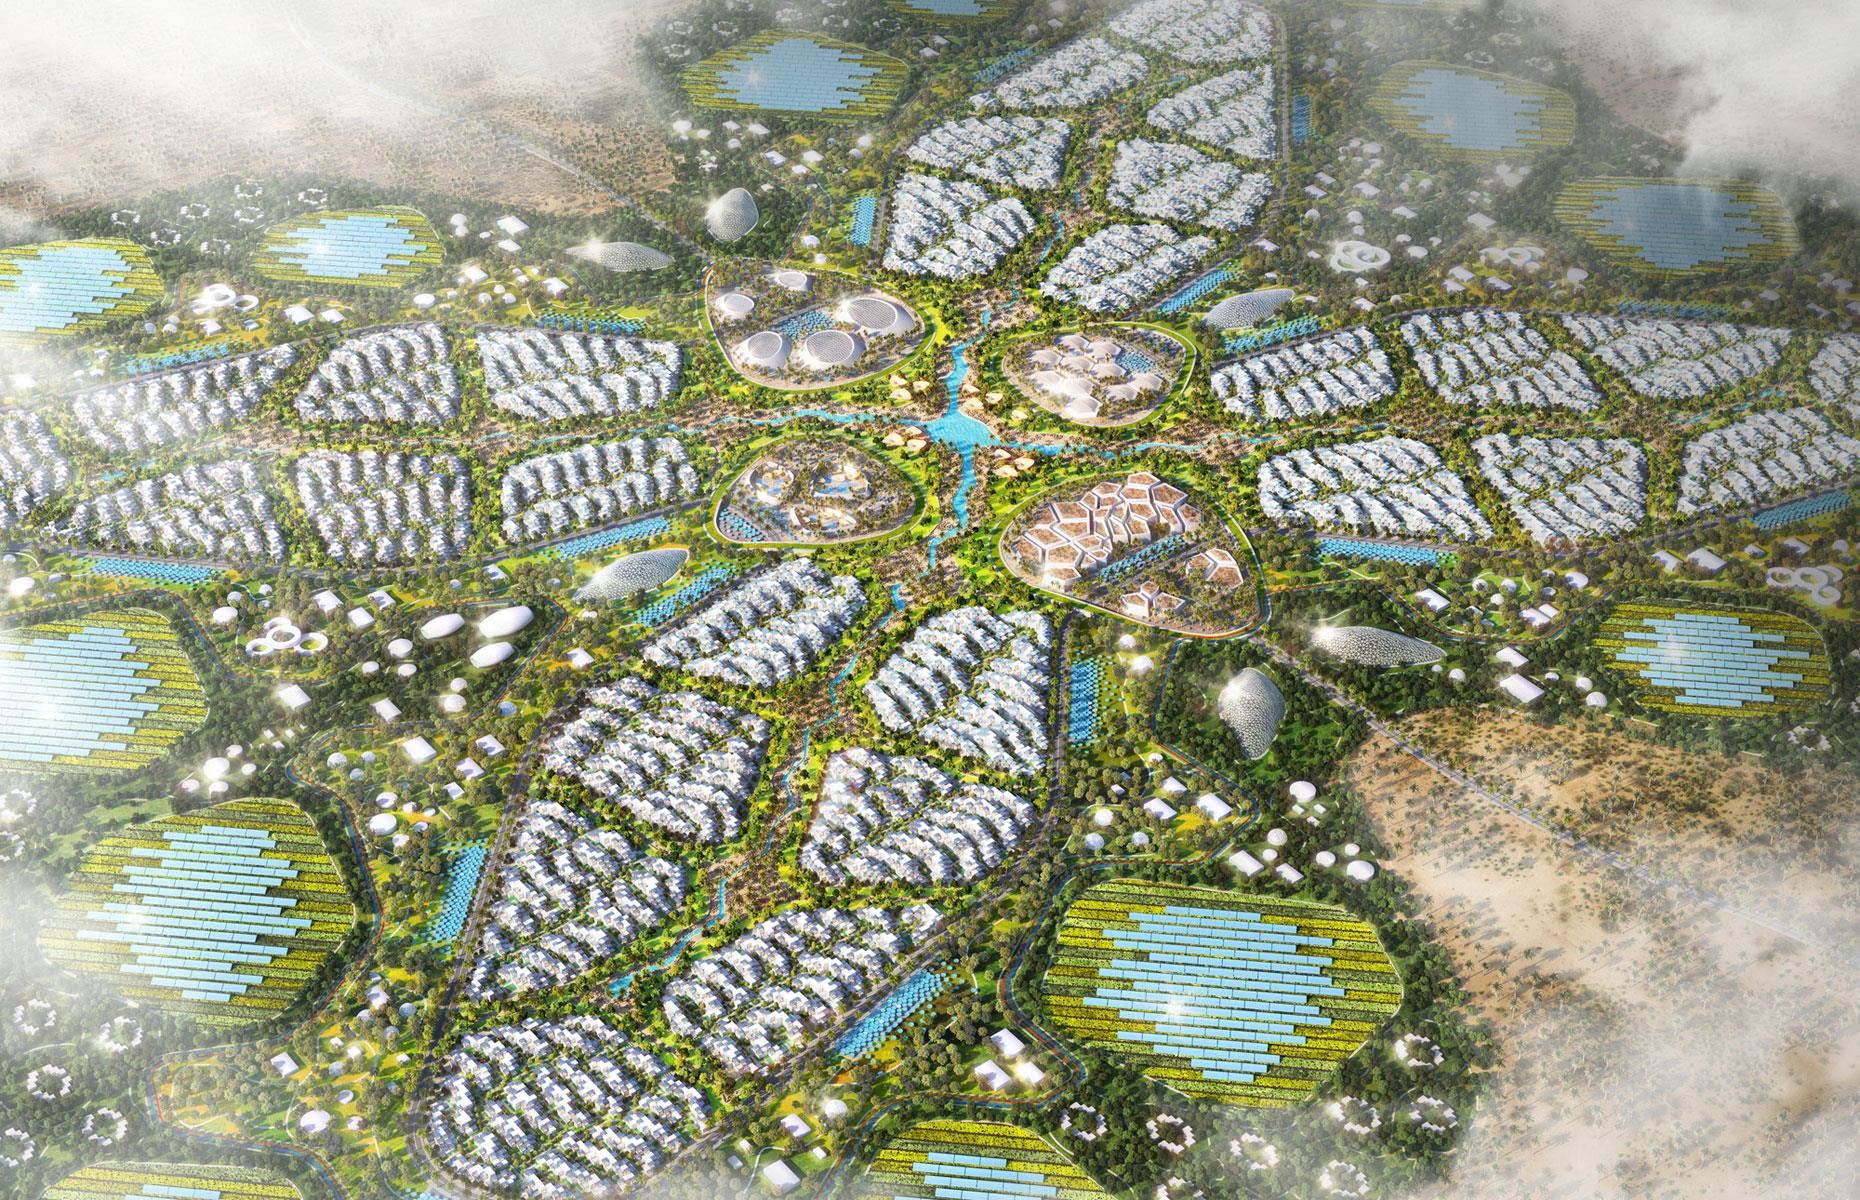 <p>Billed as the world's most walkable city, XZero City is a flower-shaped carbon-neutral community planned for a 3,953-acre site in southern Kuwait that will be home to 100,000 residents. Dubai-based developer <a href="https://urb.ae/projects/xzero/">URB</a> is behind the trailblazing megaproject, which it promises will set a new benchmark for the next generation of sustainable cities.</p>